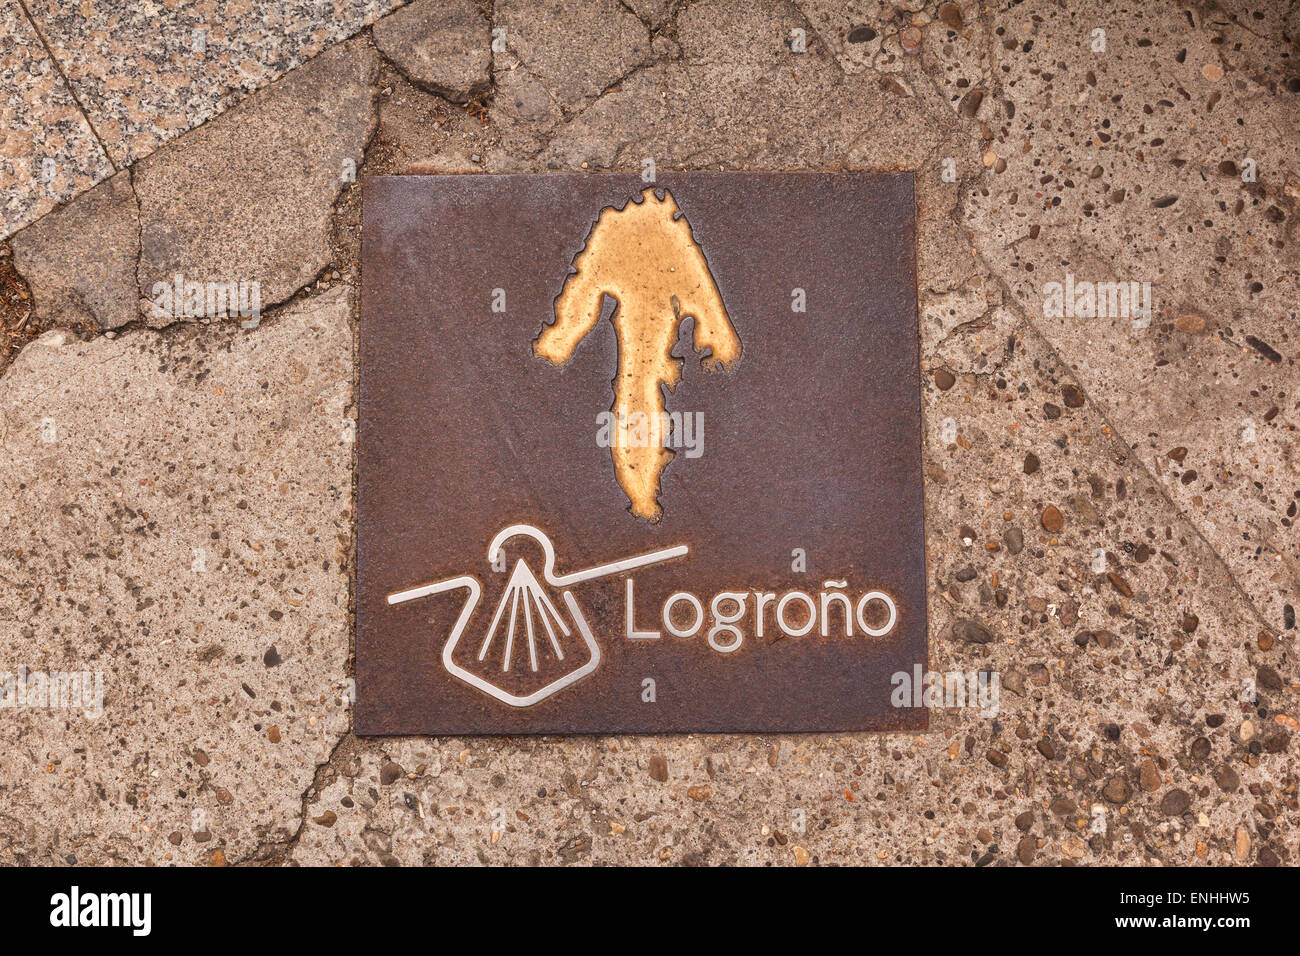 Pavement sign for the Camino de Santiago, or Pilgrims Way, which passes through the city of Logrono, La Rioja, Spain. Stock Photo